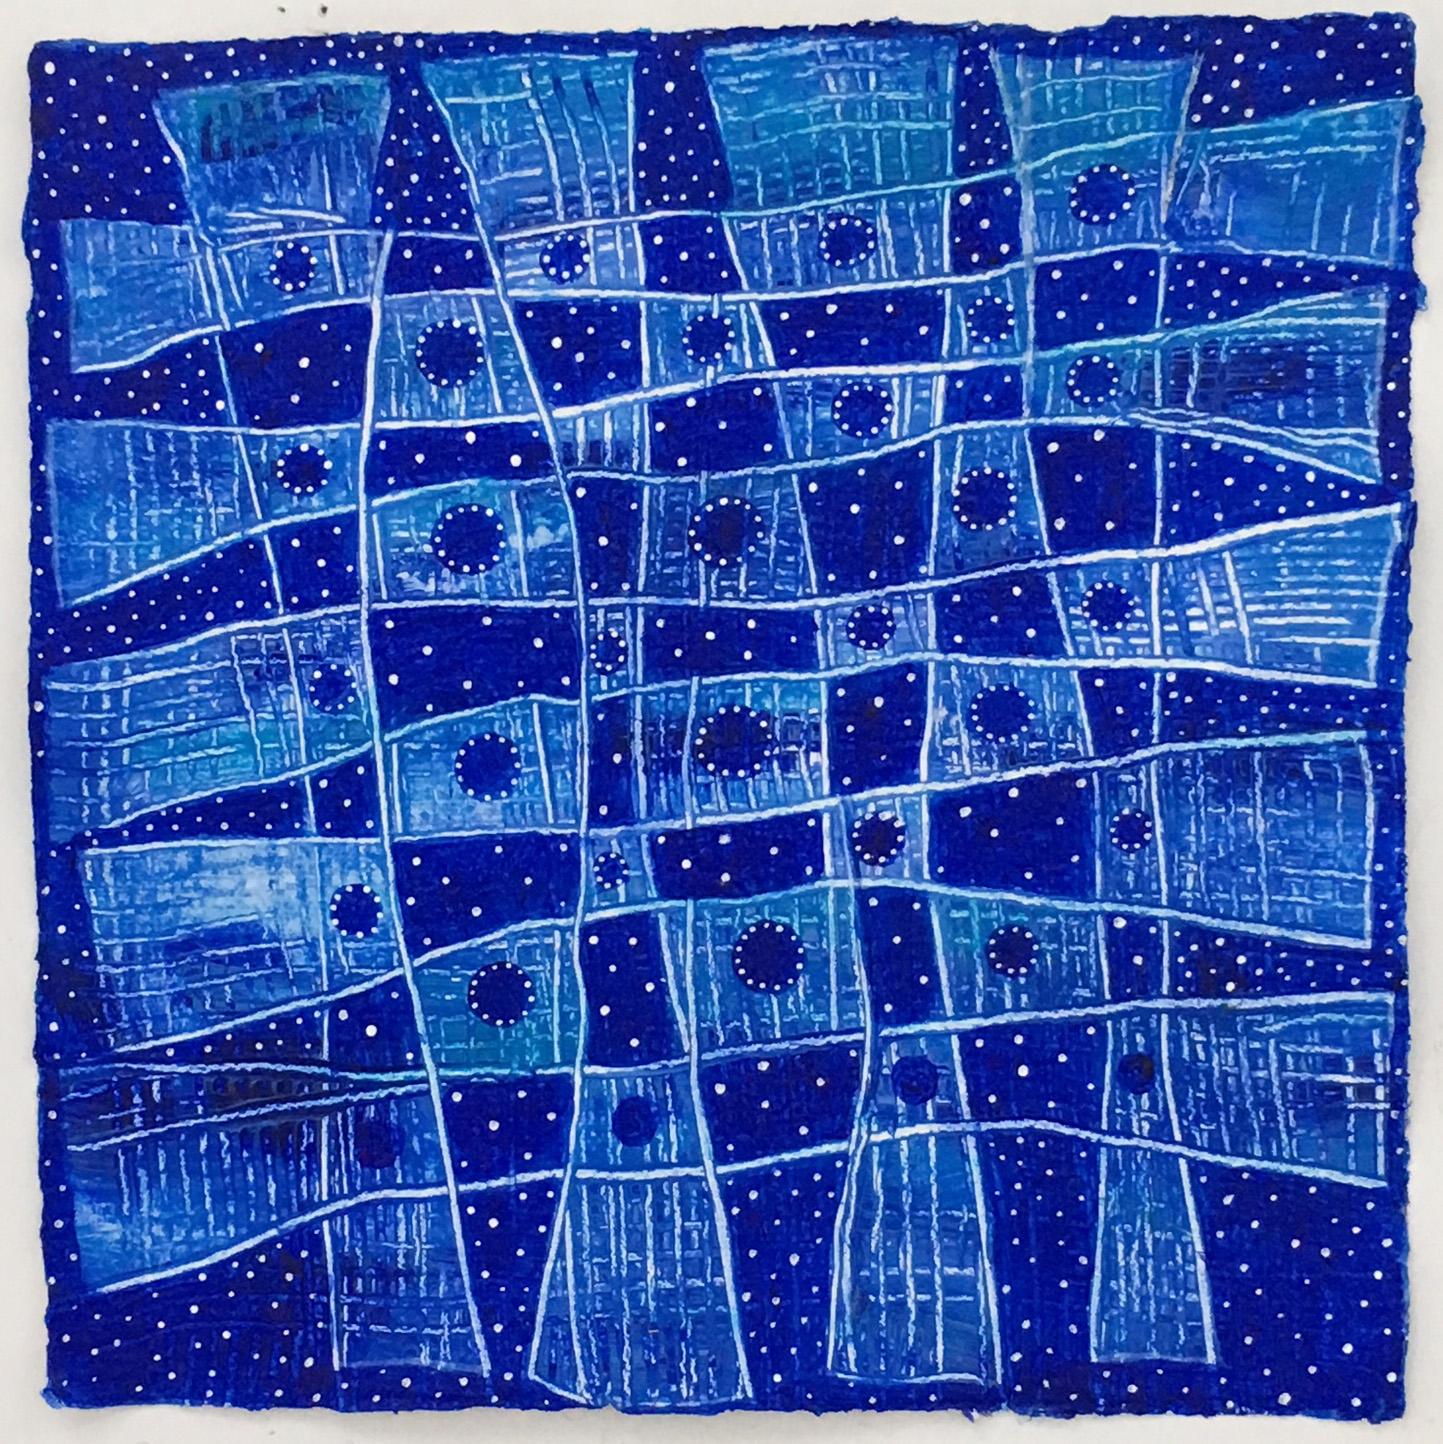 Andra Samelson, Stars of Tallapooza,  Acrylic on paper, 12 x 12 inches, 2018